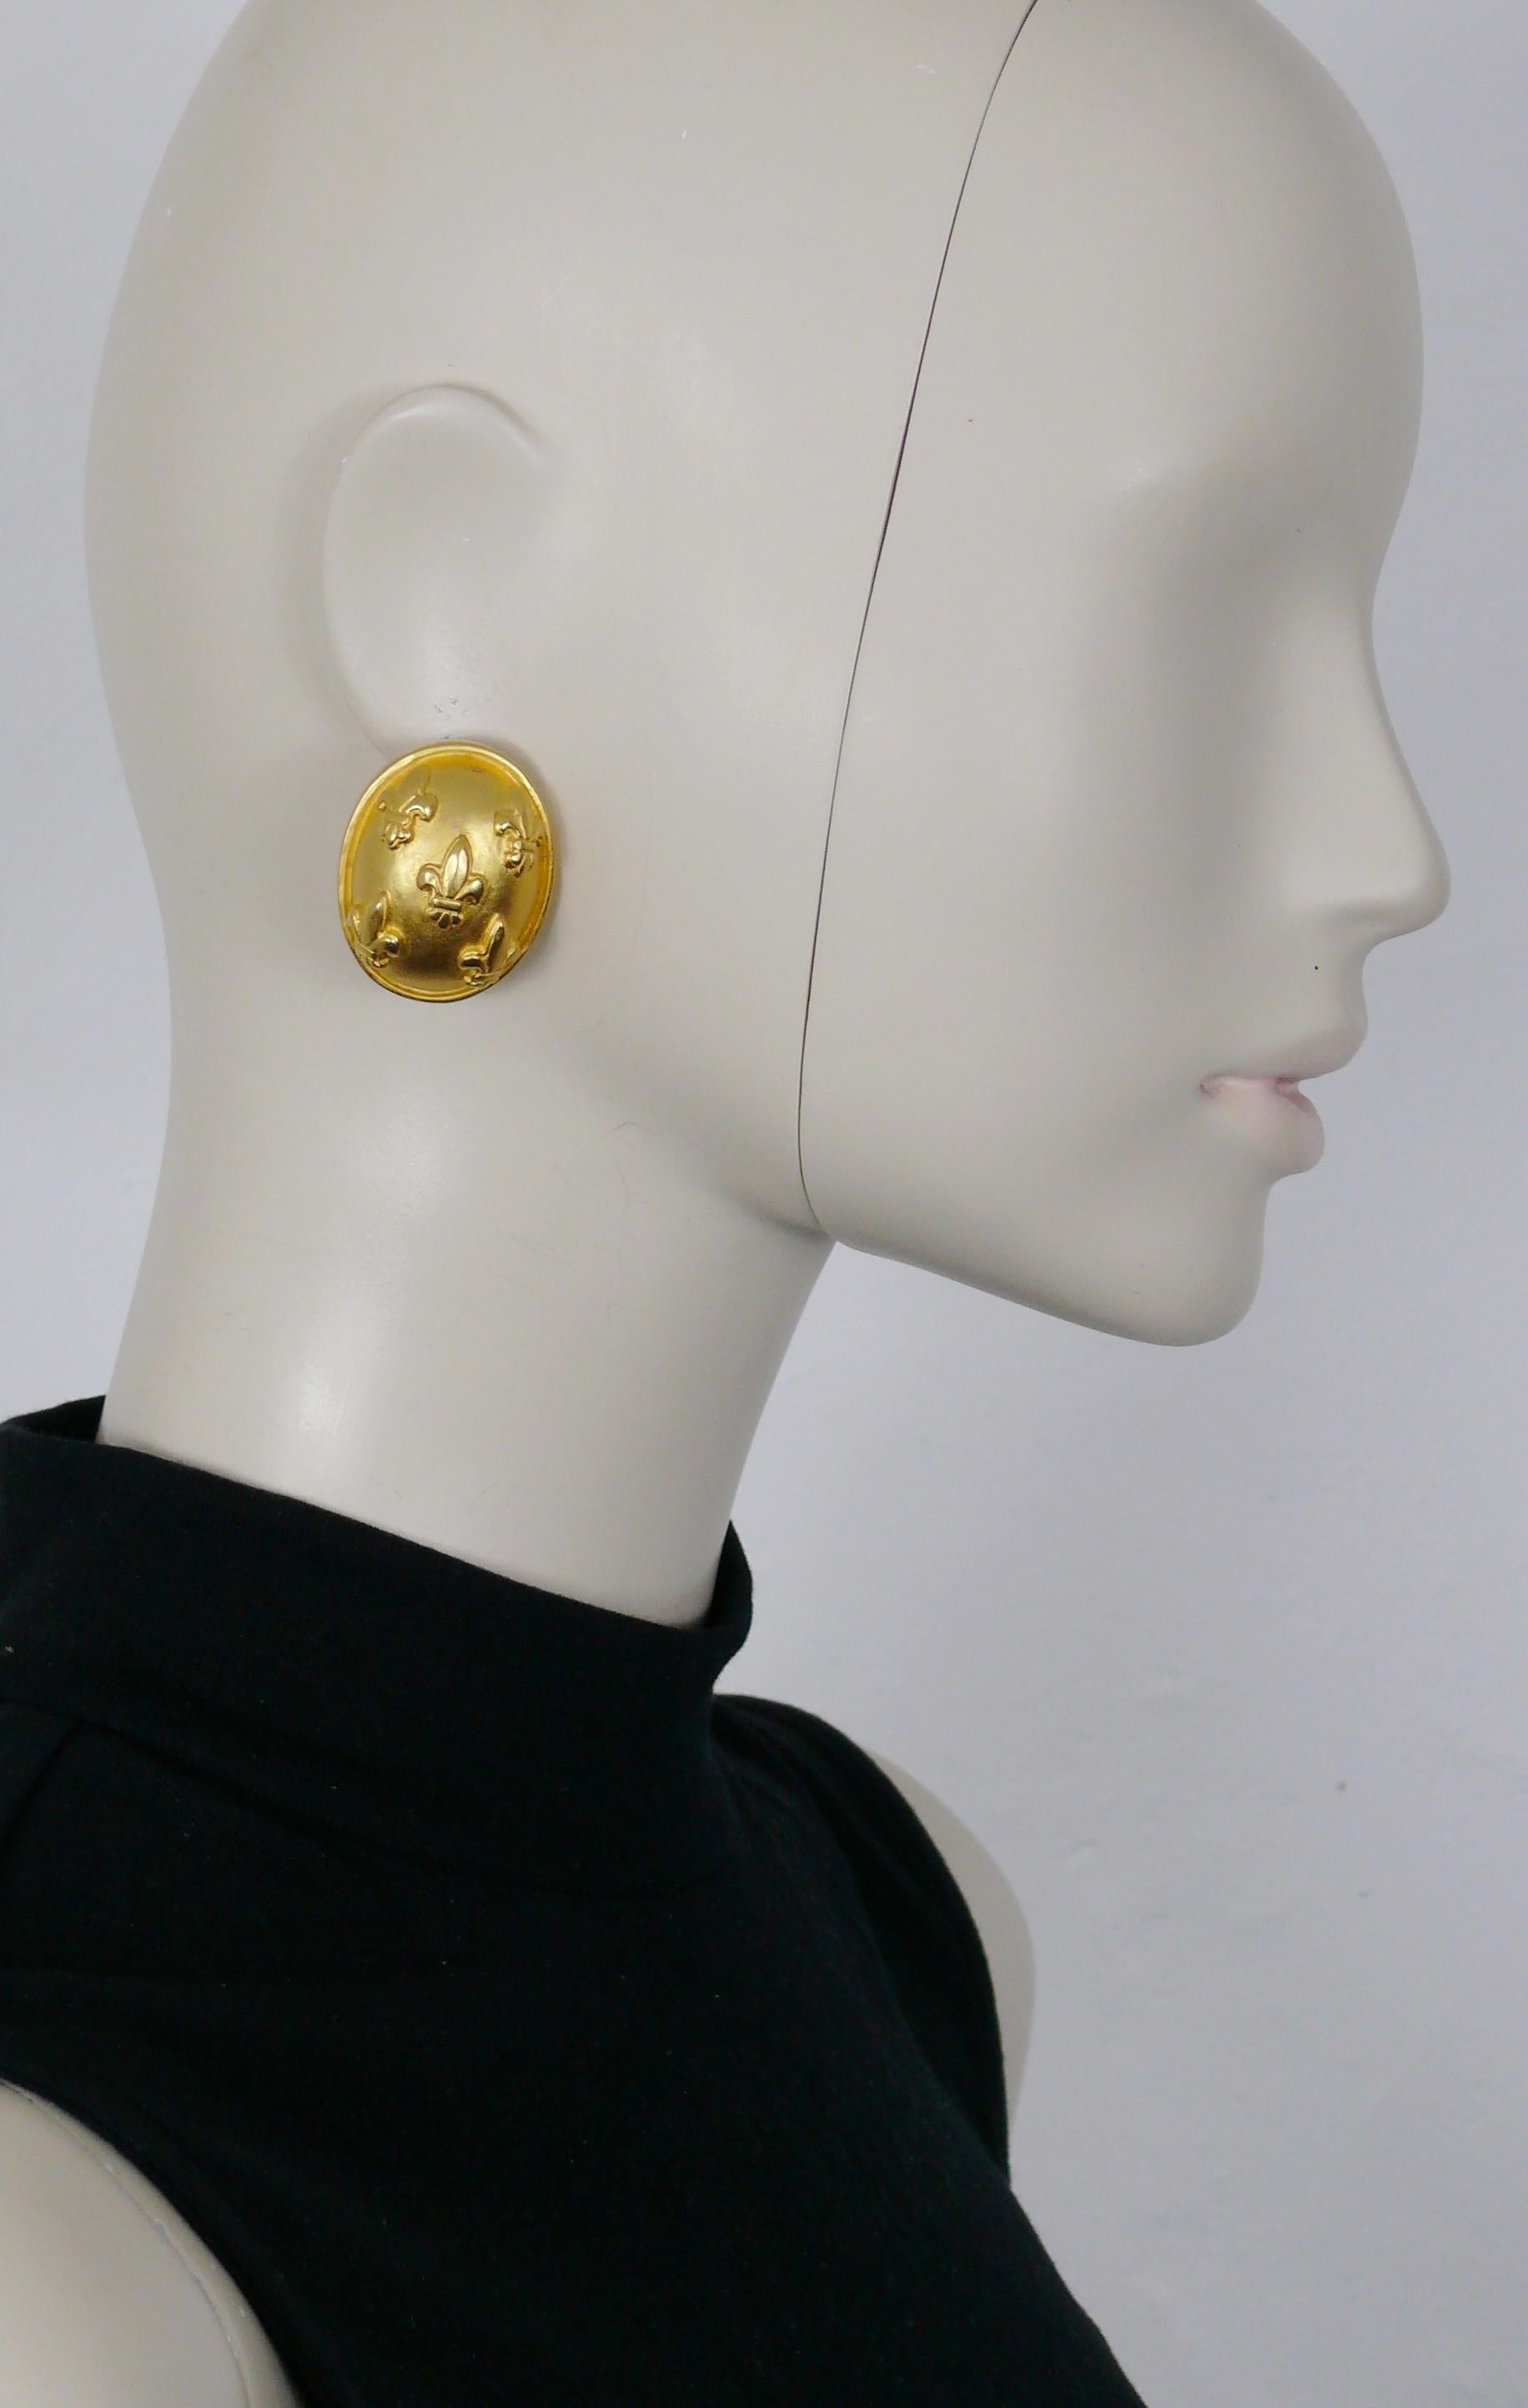 KARL LAGERFELD vintage massive matte gold toned domed clip-on earrings embossed with fleurs de lys.

Embossed KL.

Indicative measurements : height approx. 3.6 cm (1.42 inches) / width approx. 2.8 cm (1.10 inches).

NOTES
- This is a preloved